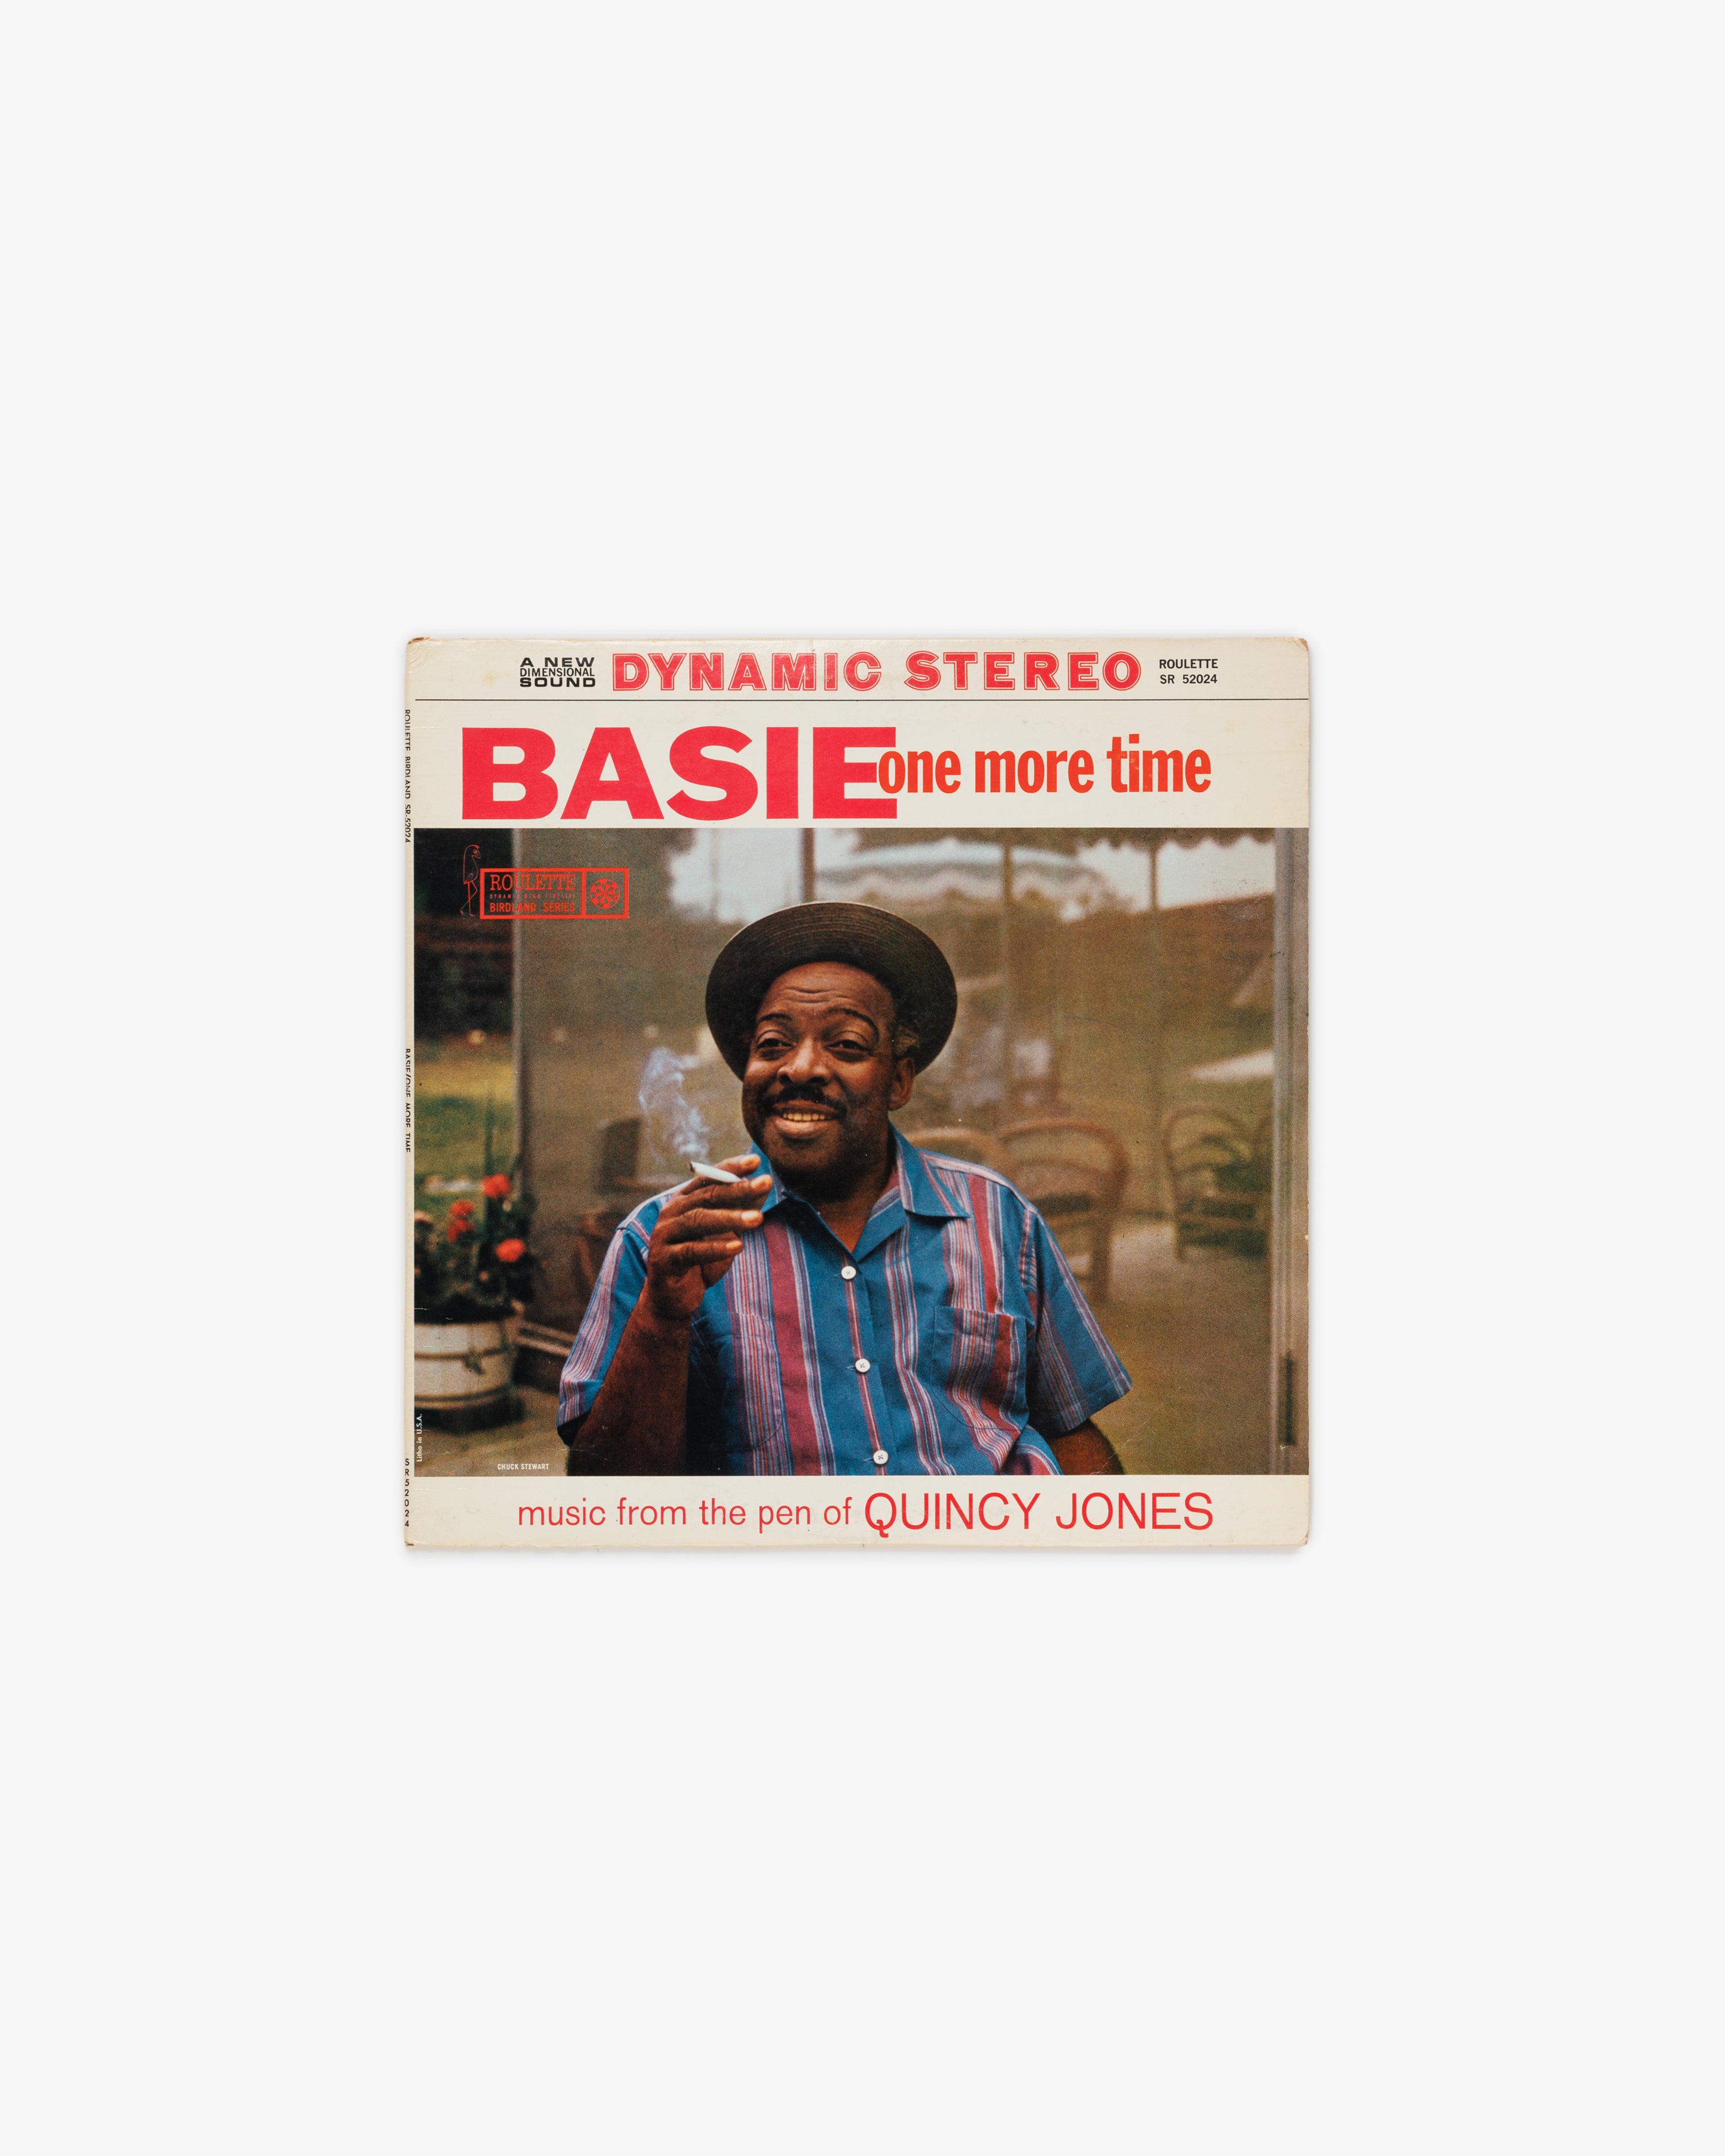 Count Basie Orchestra - Basie (One More Time) LP